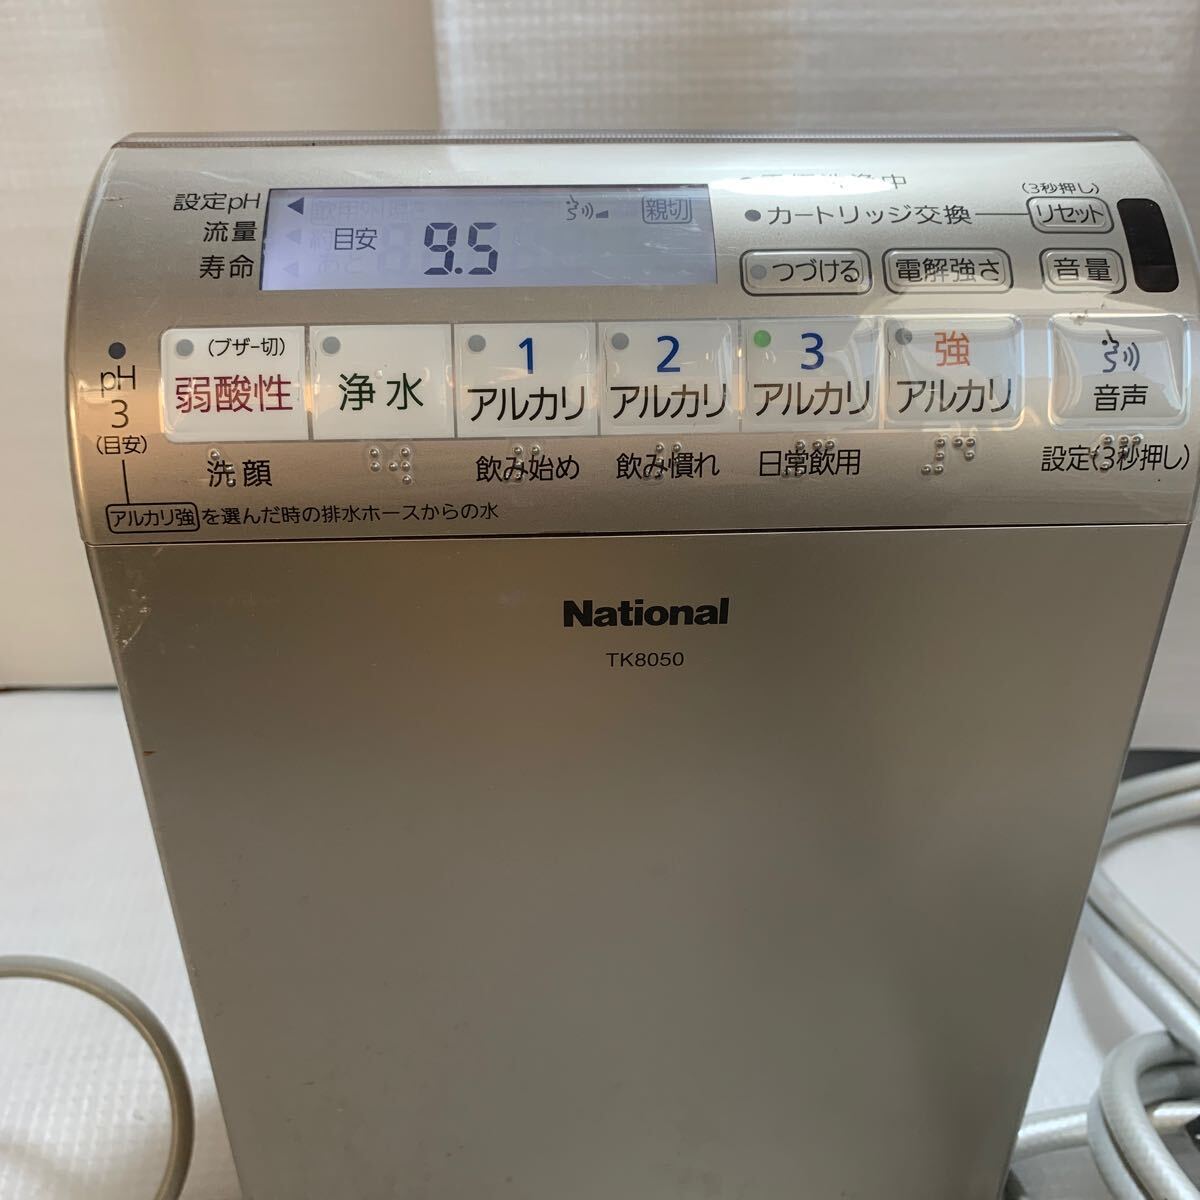 National National TK8050 water ionizer used 